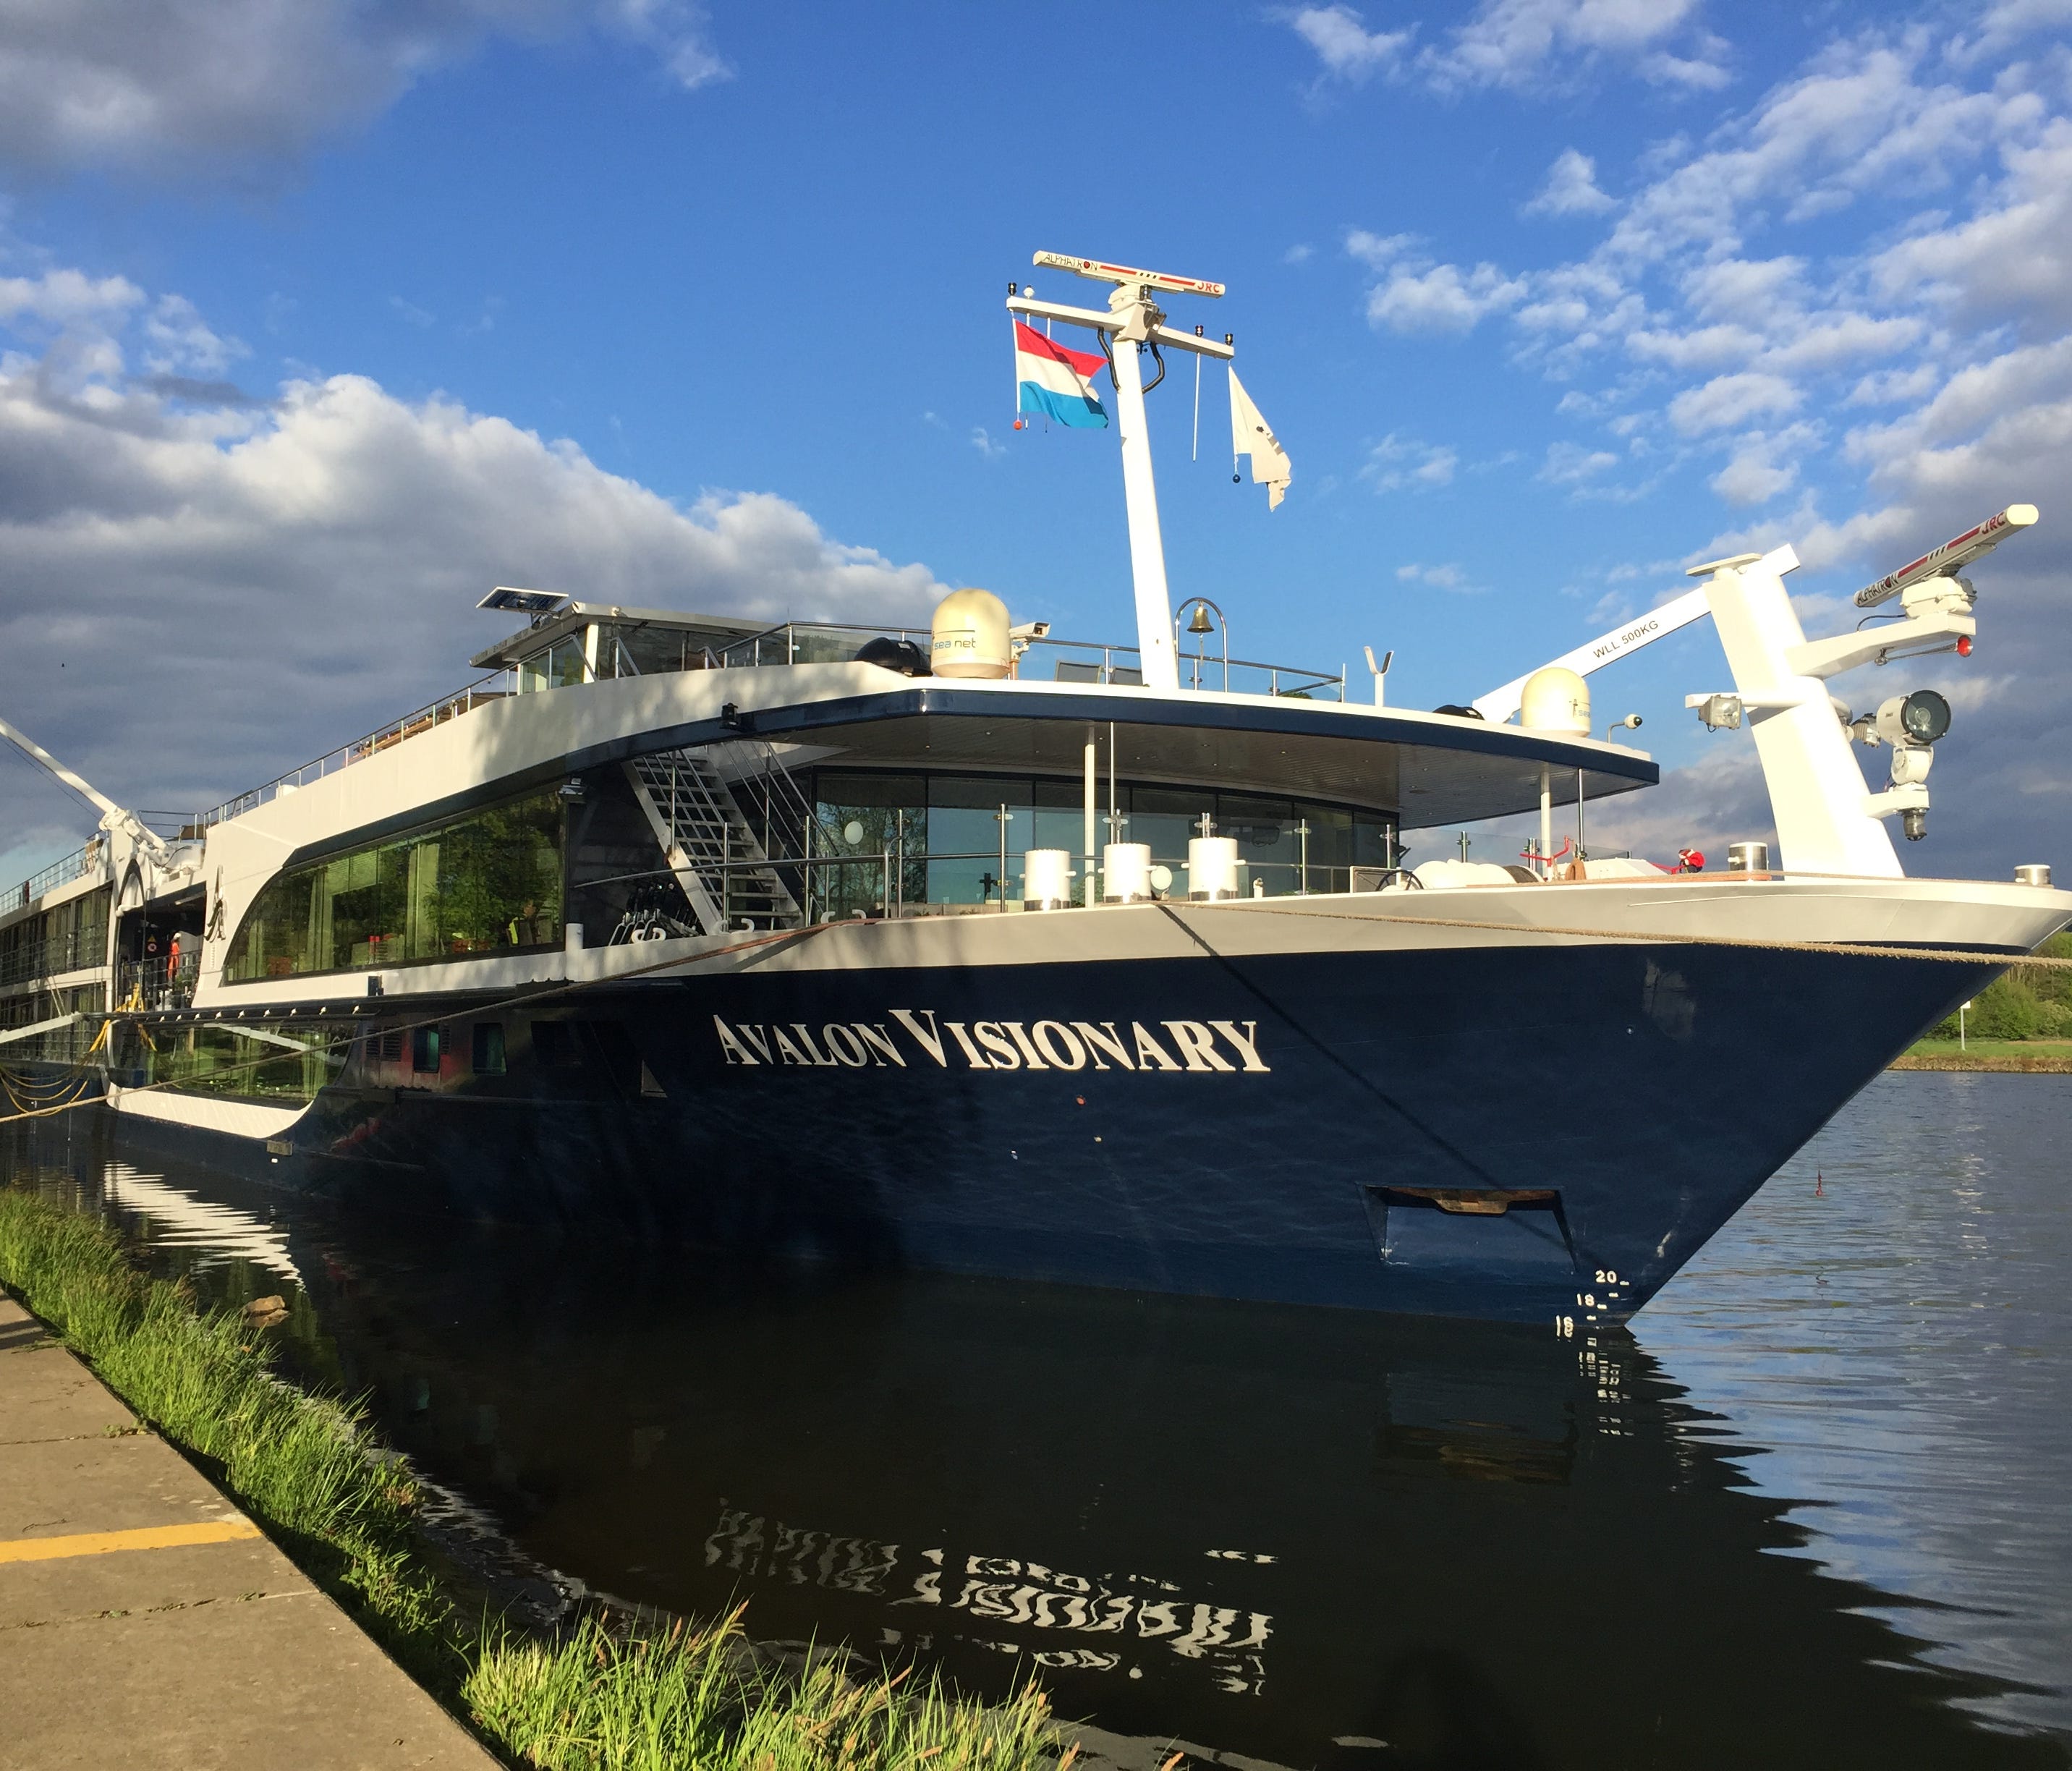 The 128-passenger Avalon Visionary is one of river line Avalon Waterways' 16 vessels in Europe.